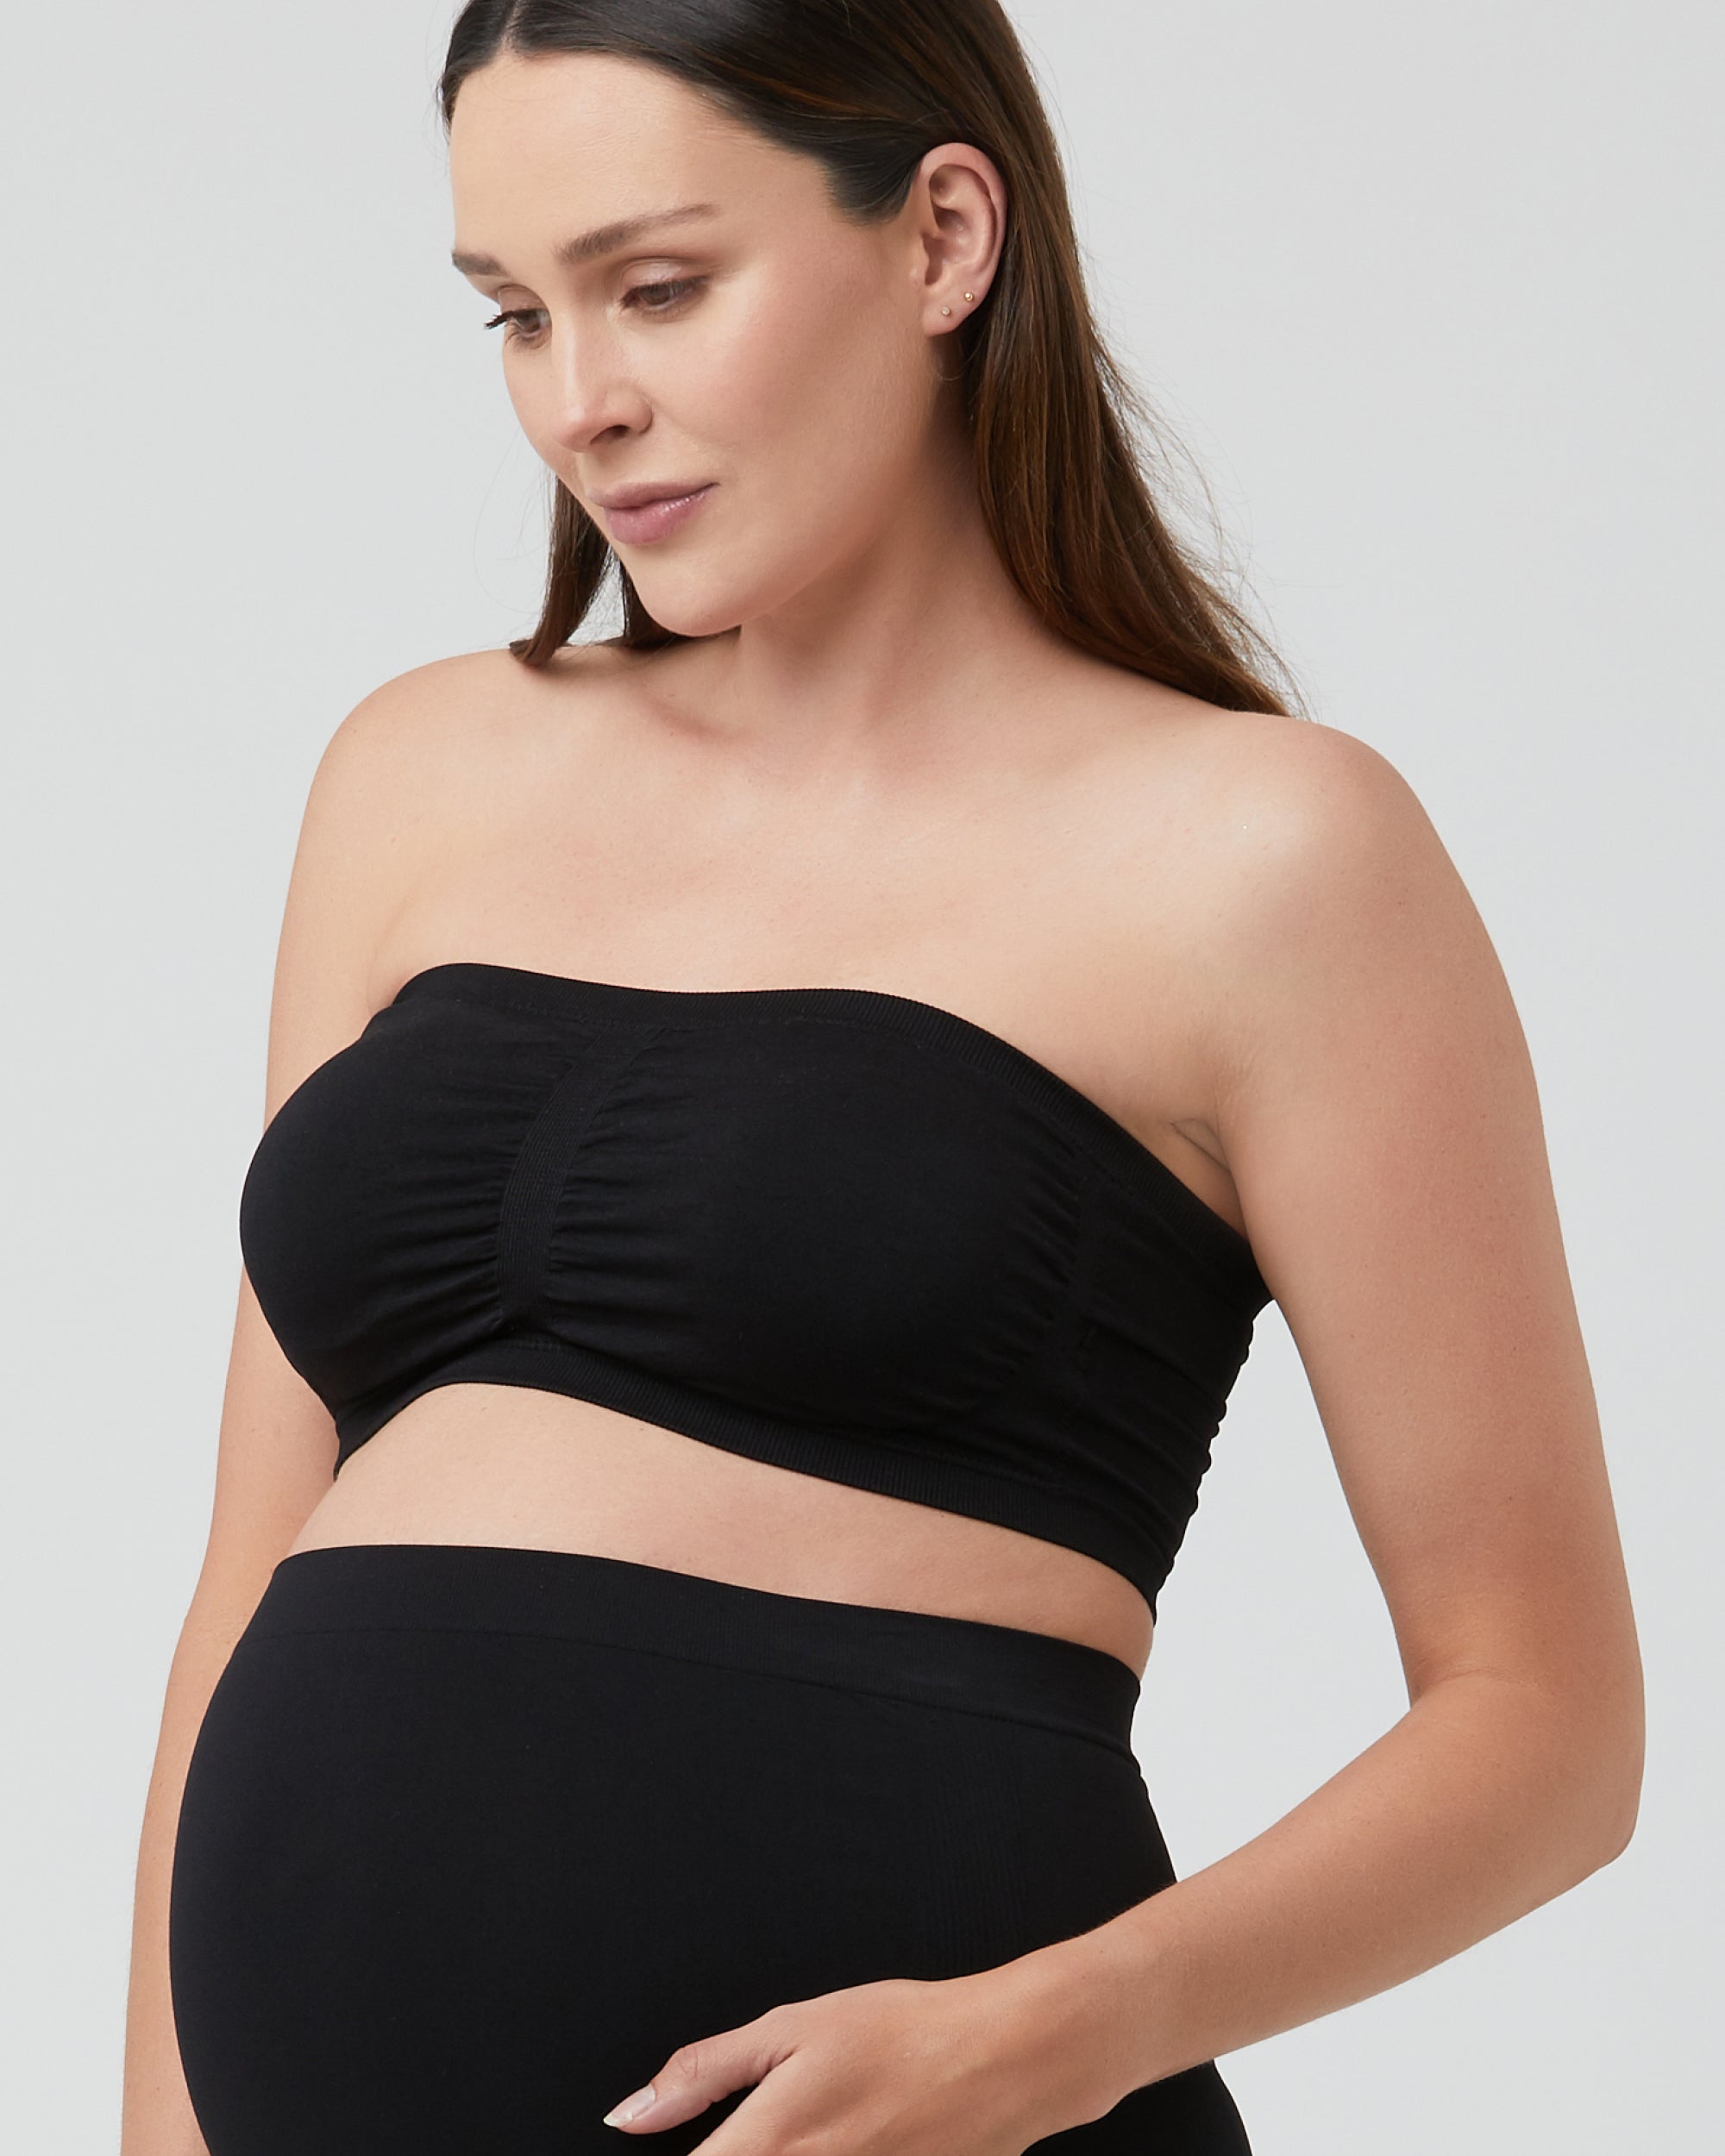  Bandeau Top with Support Maternity Bralette Lace Panel Large  Exercise Strapless Black Dresses Reusable Bra Pads C Cup : Ropa, Zapatos y  Joyería